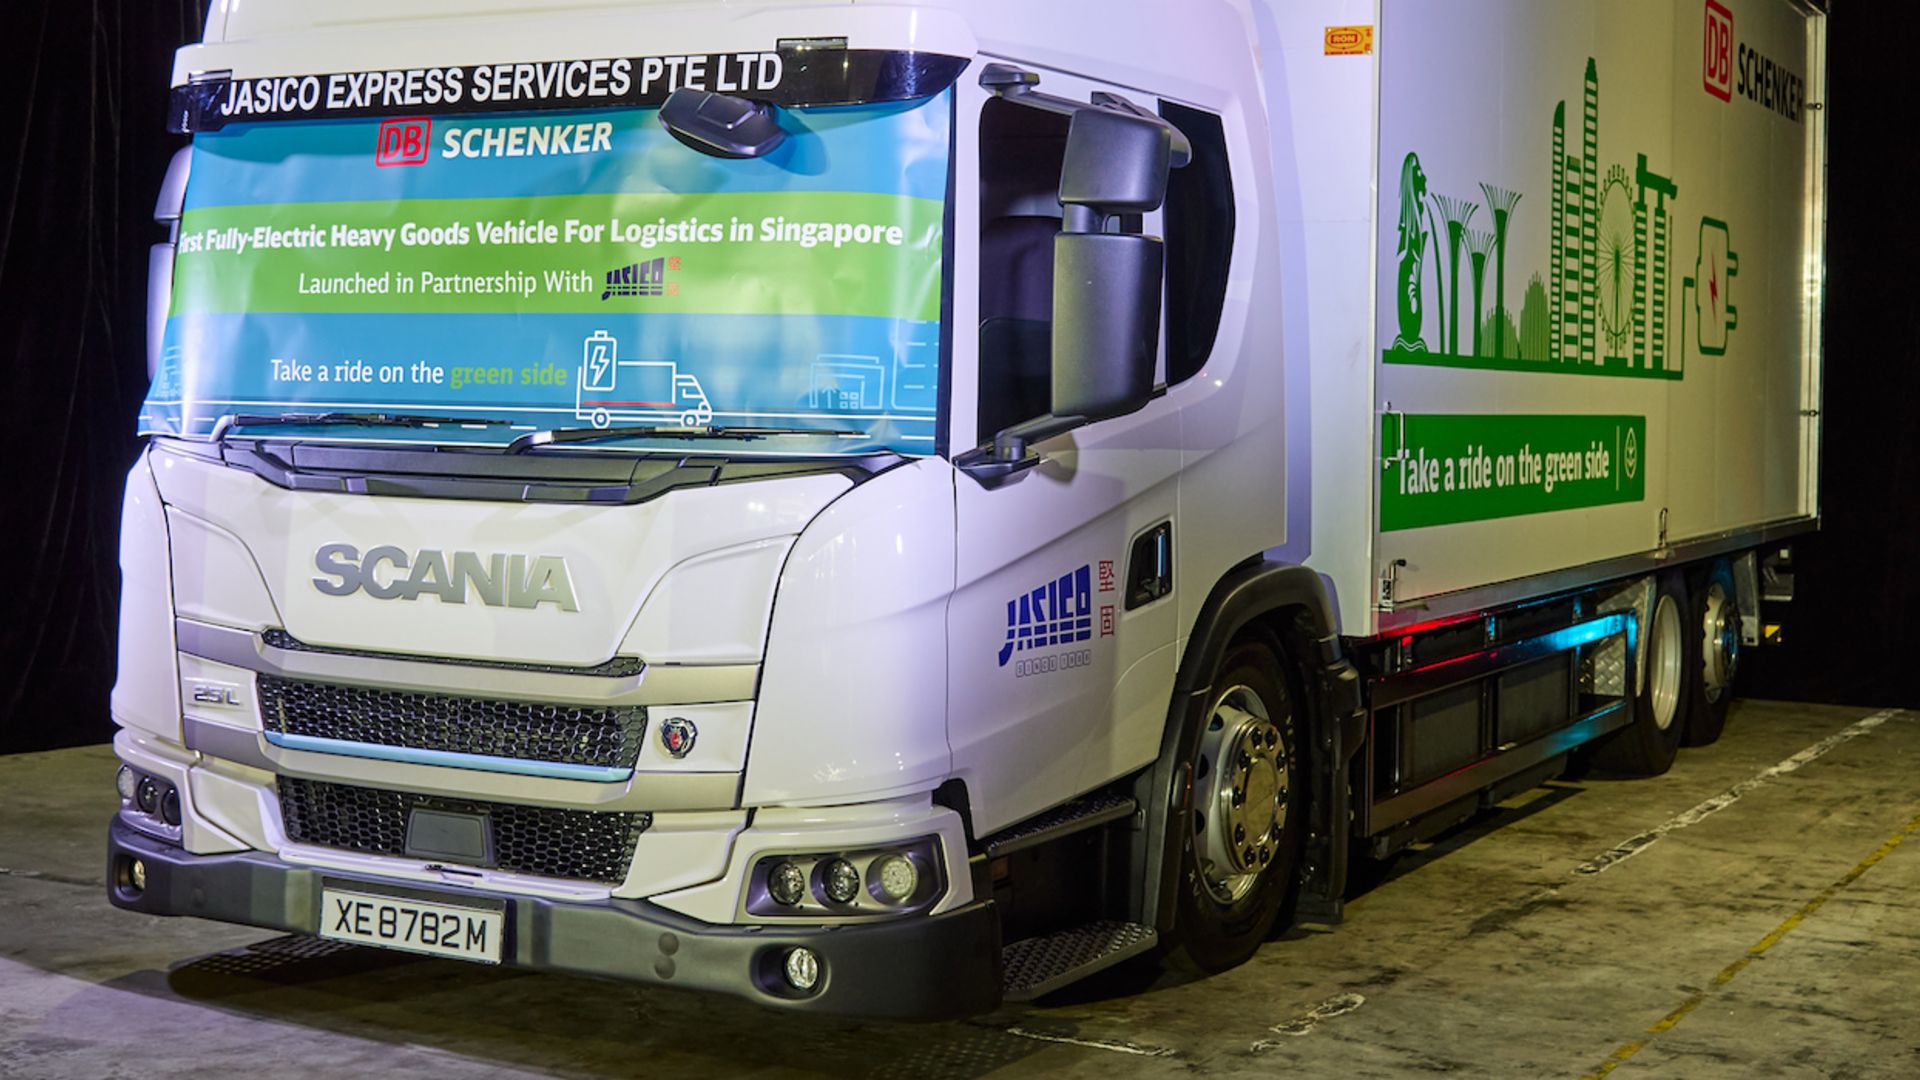 Singapore’s logistics sector recently took delivery of the first battery-electric truck from Scania.